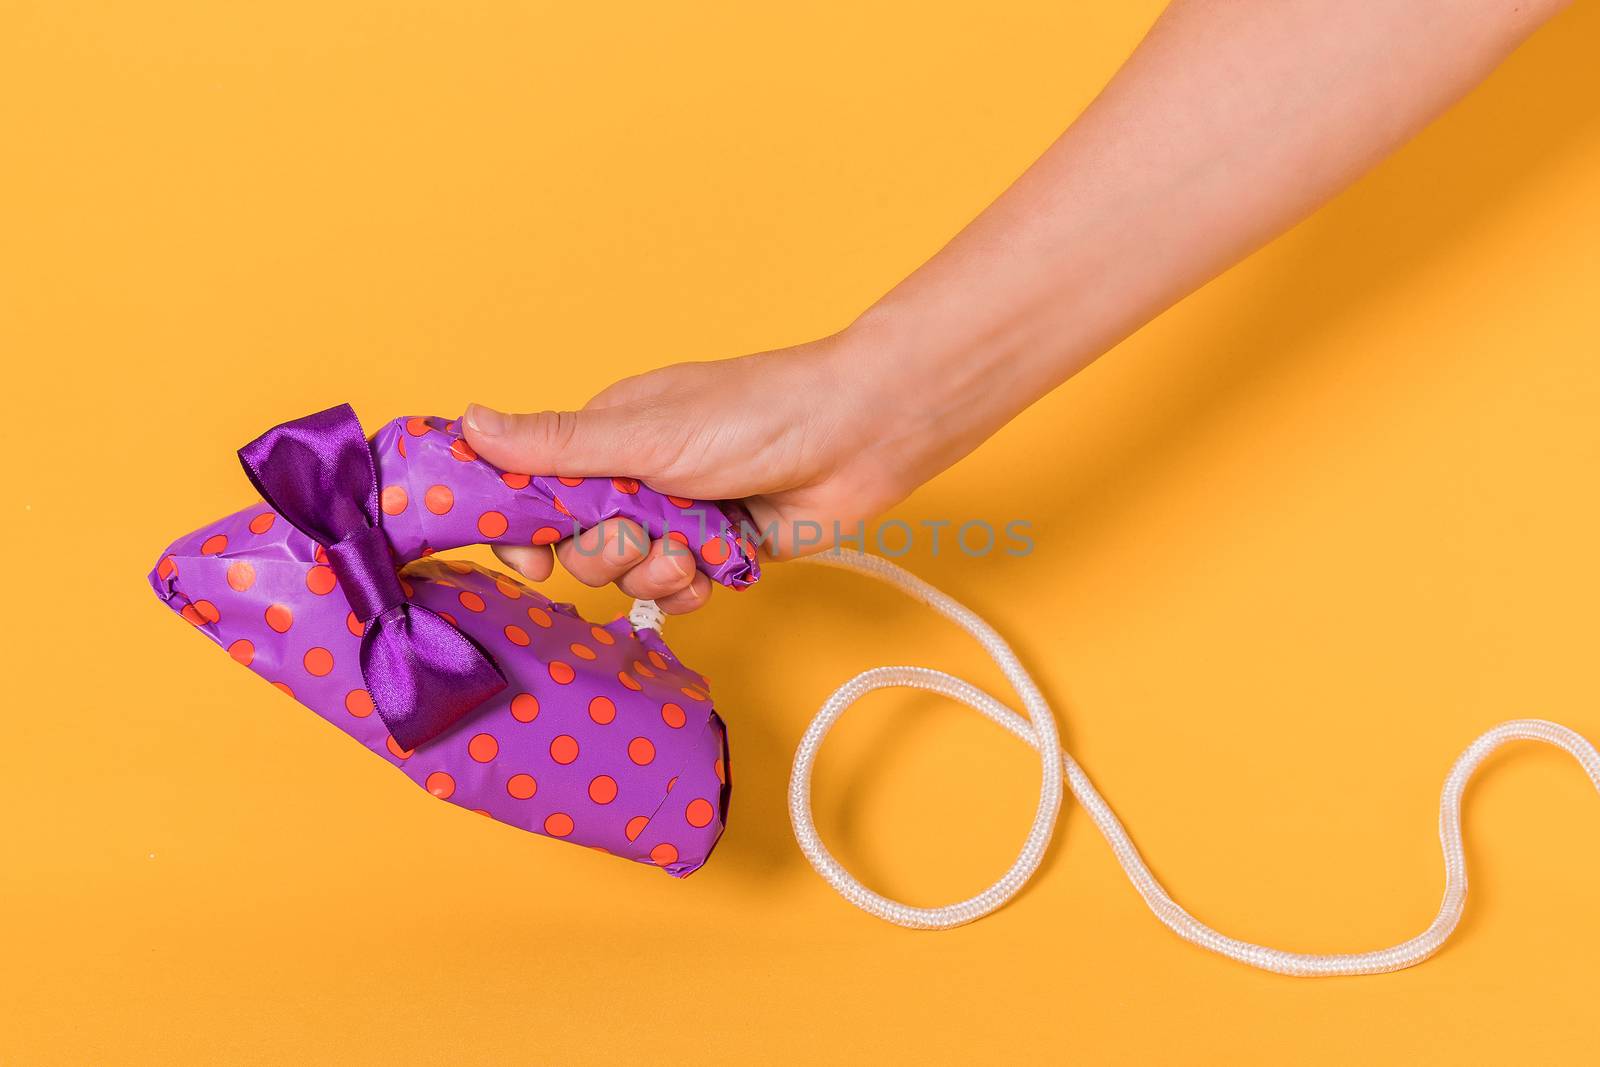 Female hand holding an iron wrapped in purple gift paper on a orange background